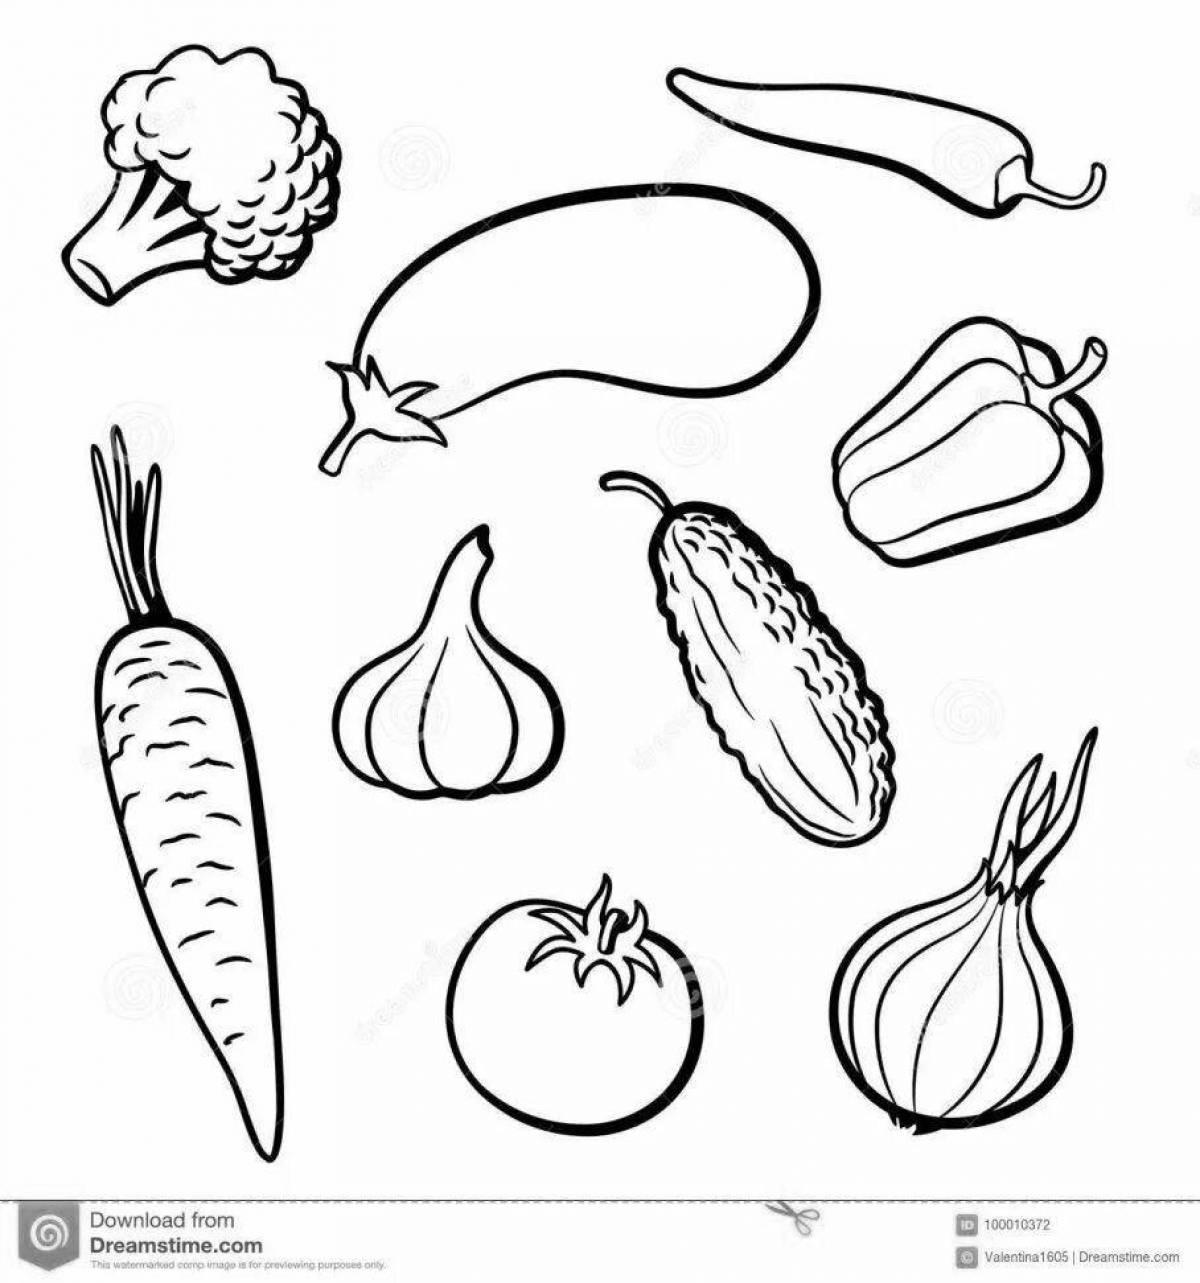 Joyful tomato and cucumber coloring page